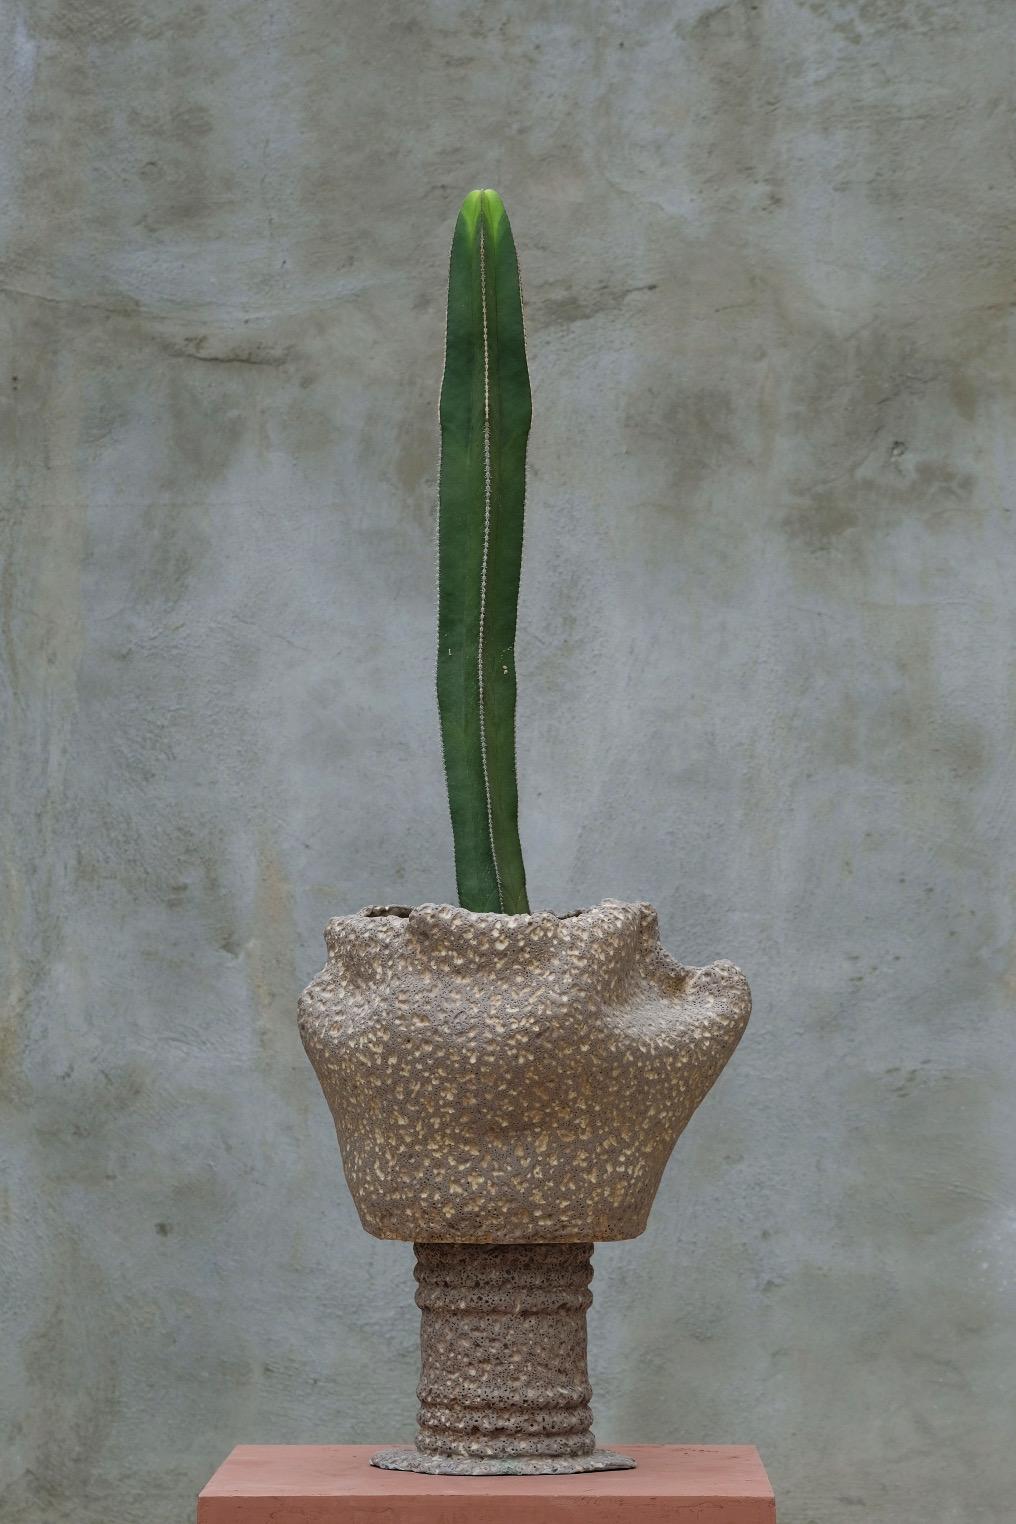 This sculptural planter is a part of LGS Studio's 